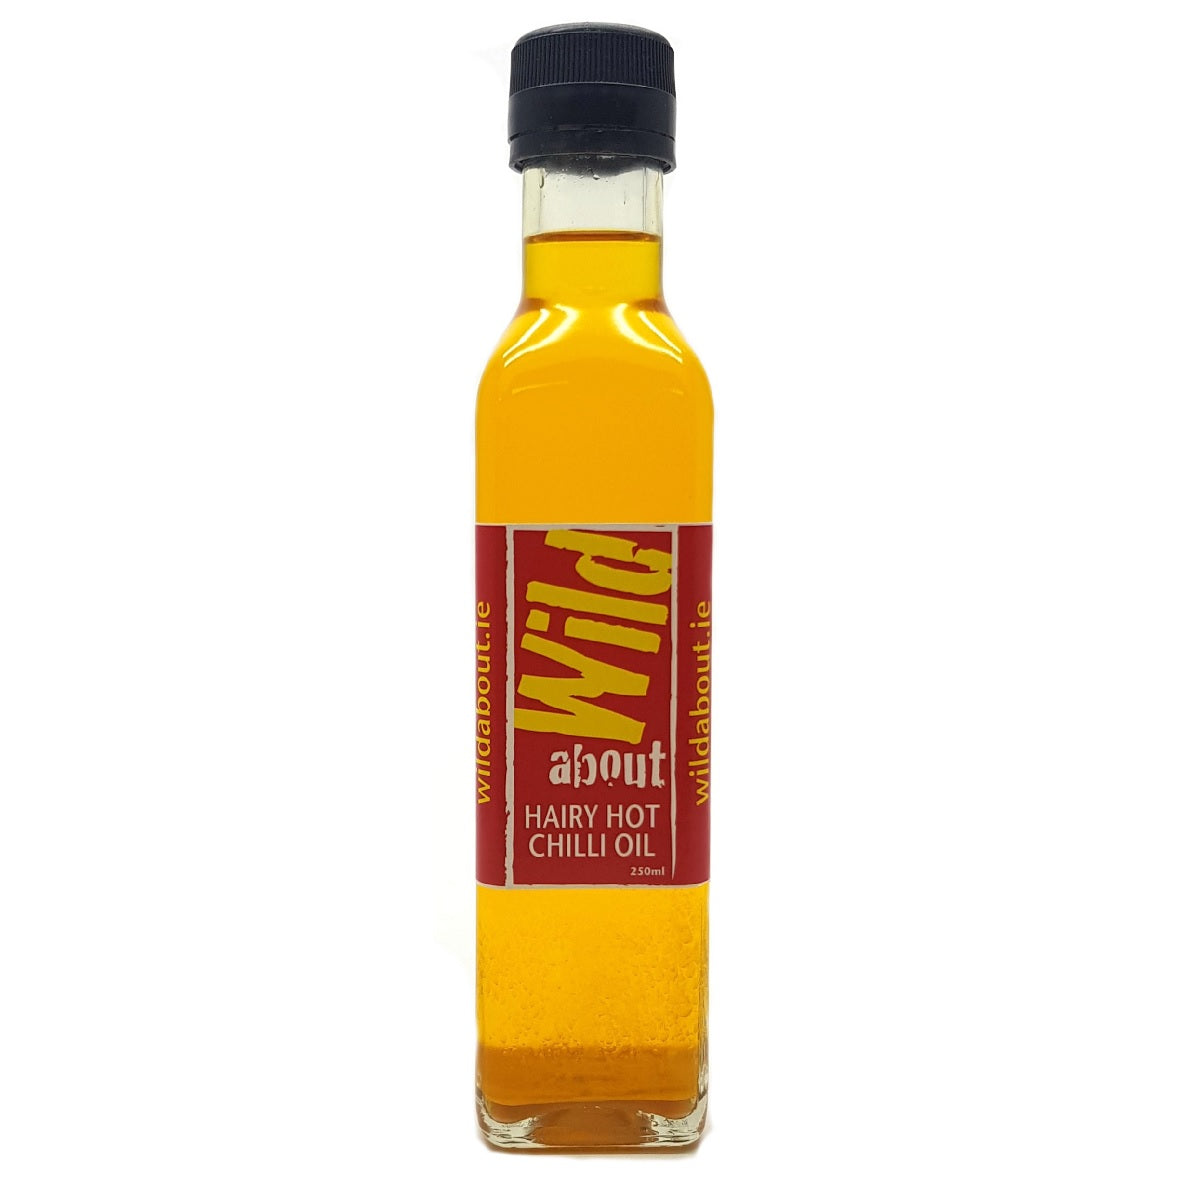 Wild About Hairy Hot Chilli Oil 250ml